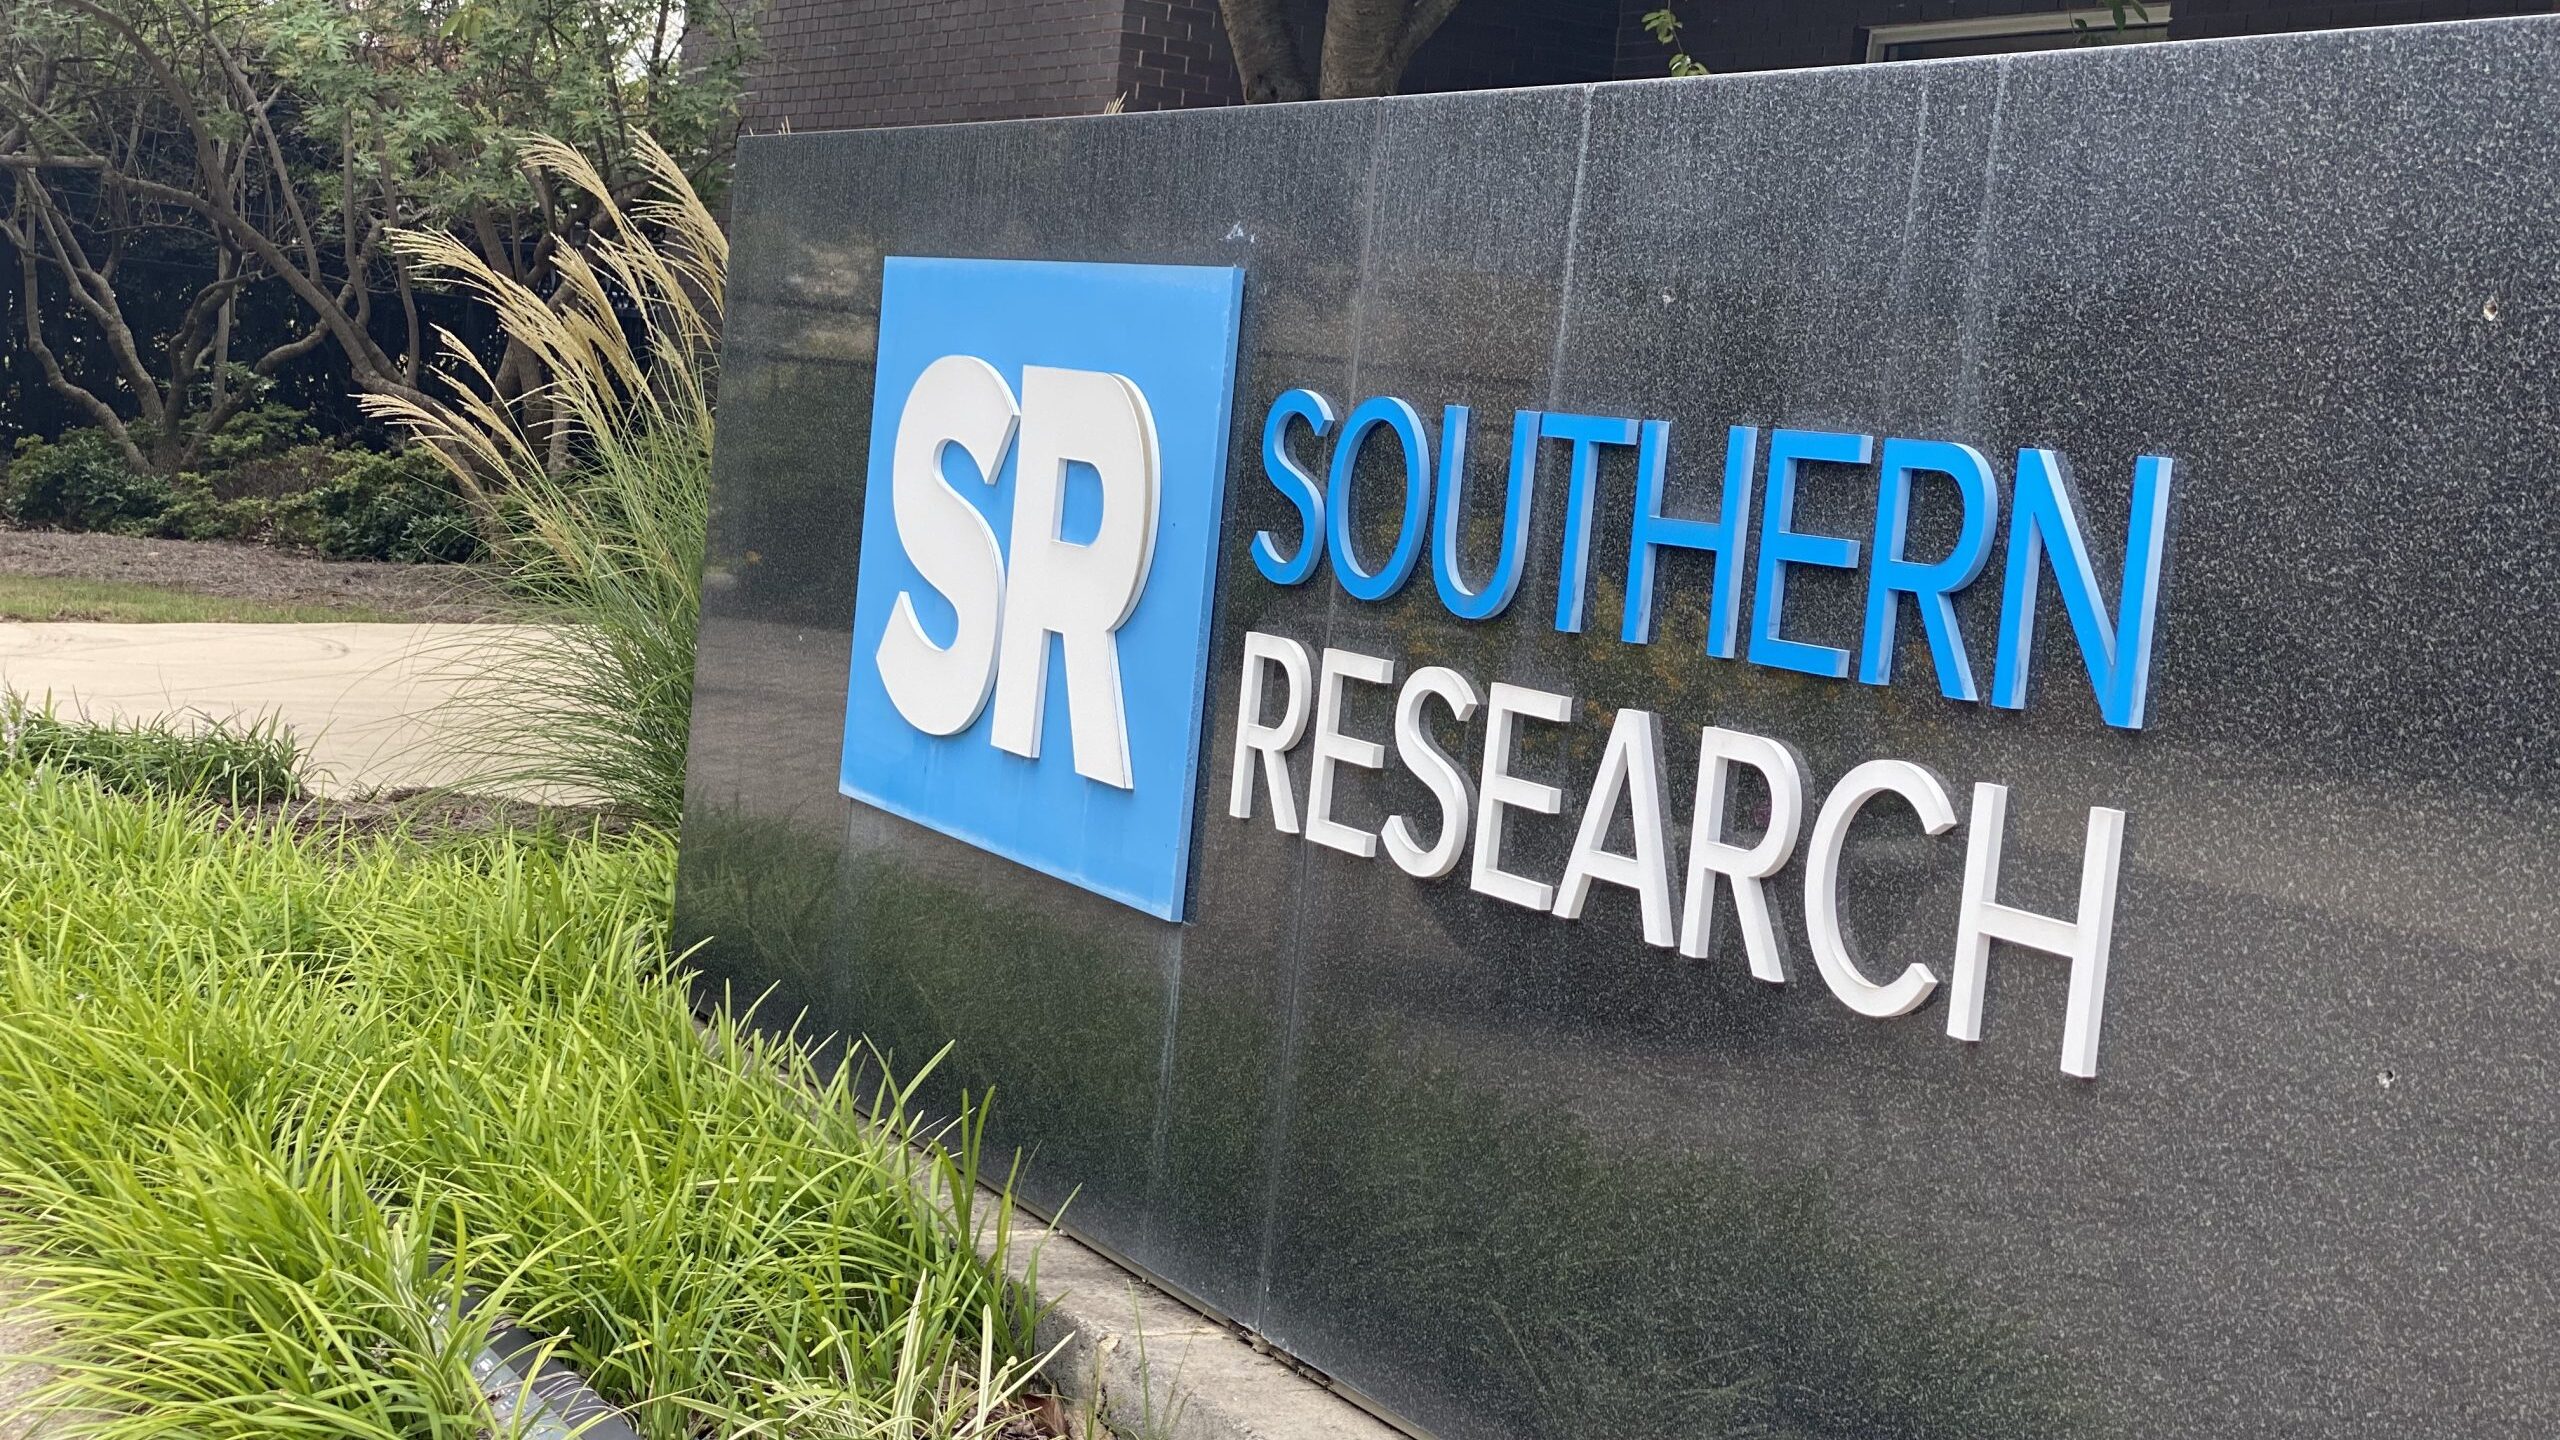 Birmingham Business Journal: Josh Carpenter looks to boost IP and job growth at Southern Research